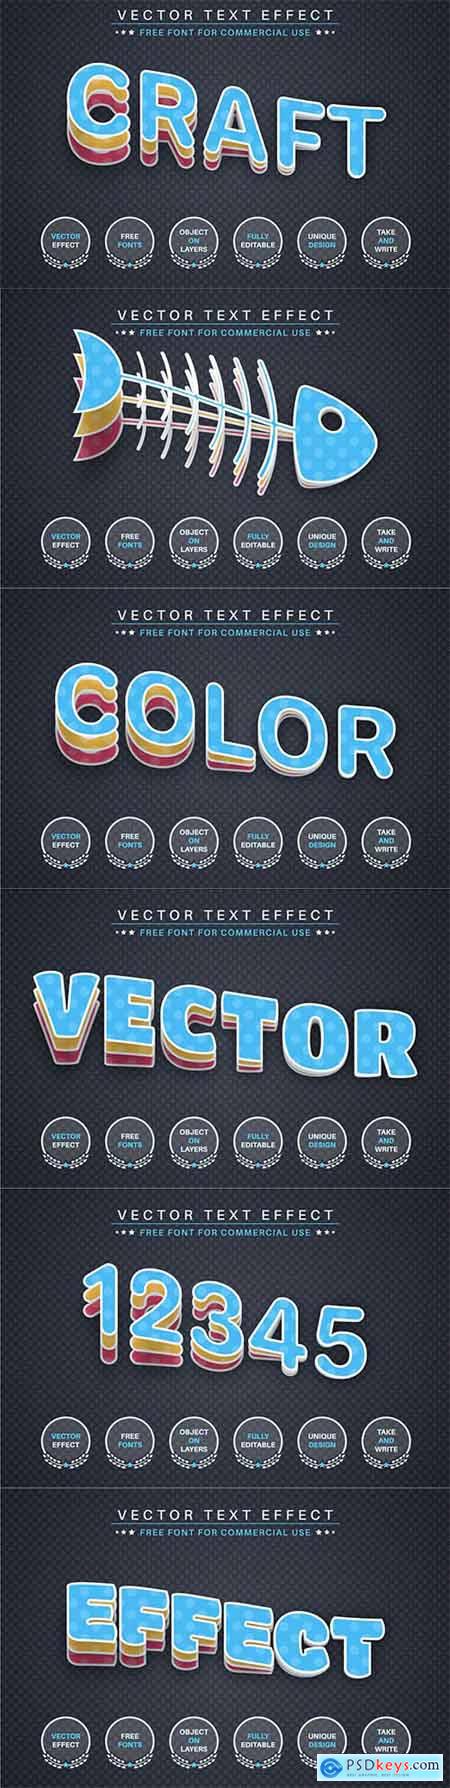 Slice paper - editable text effect, font style